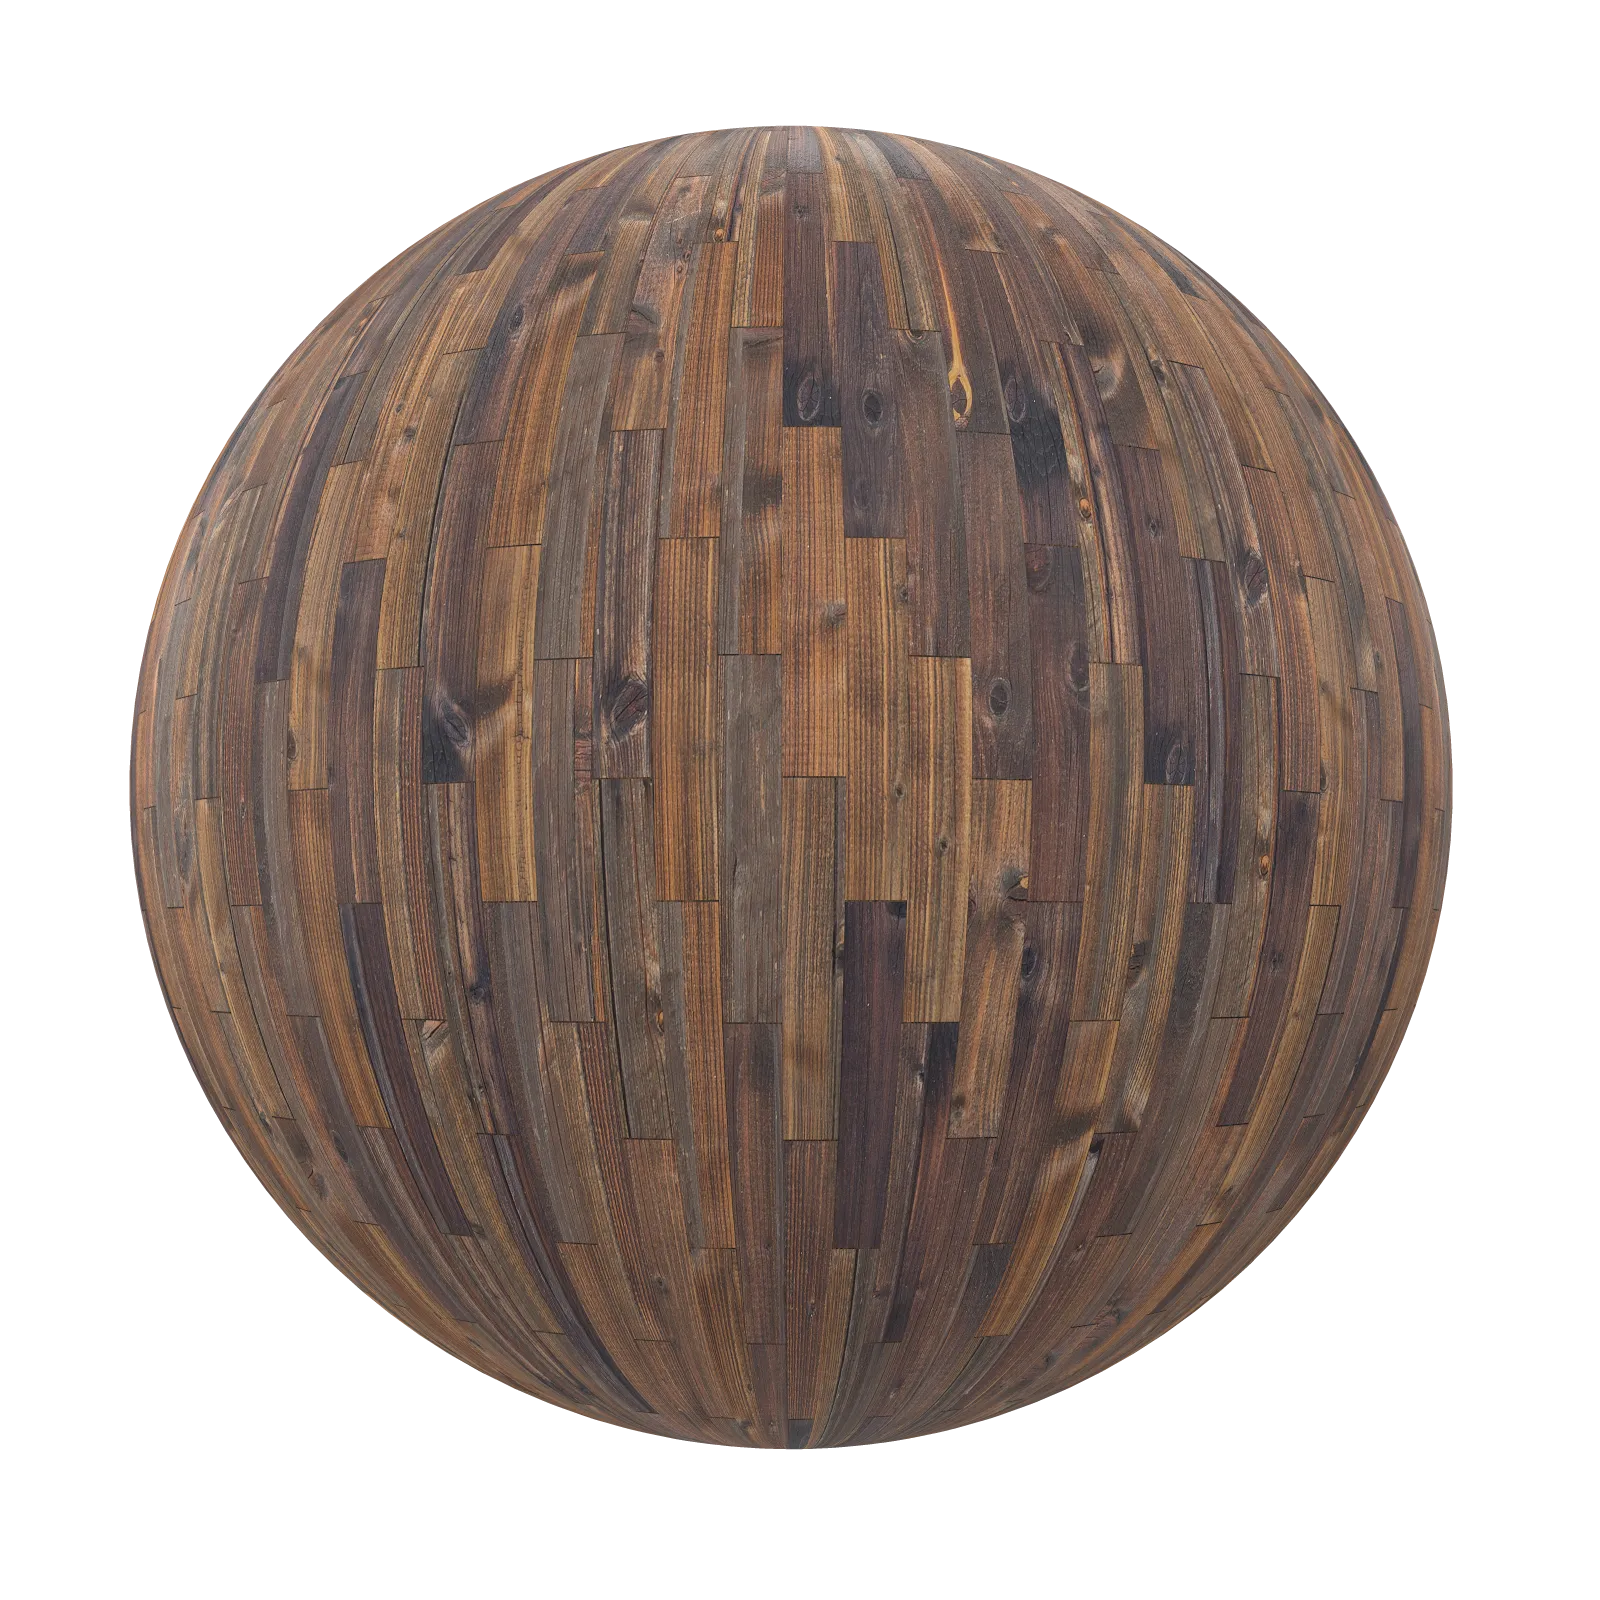 TEXTURES – WOOD – Old Wood Tiles 19